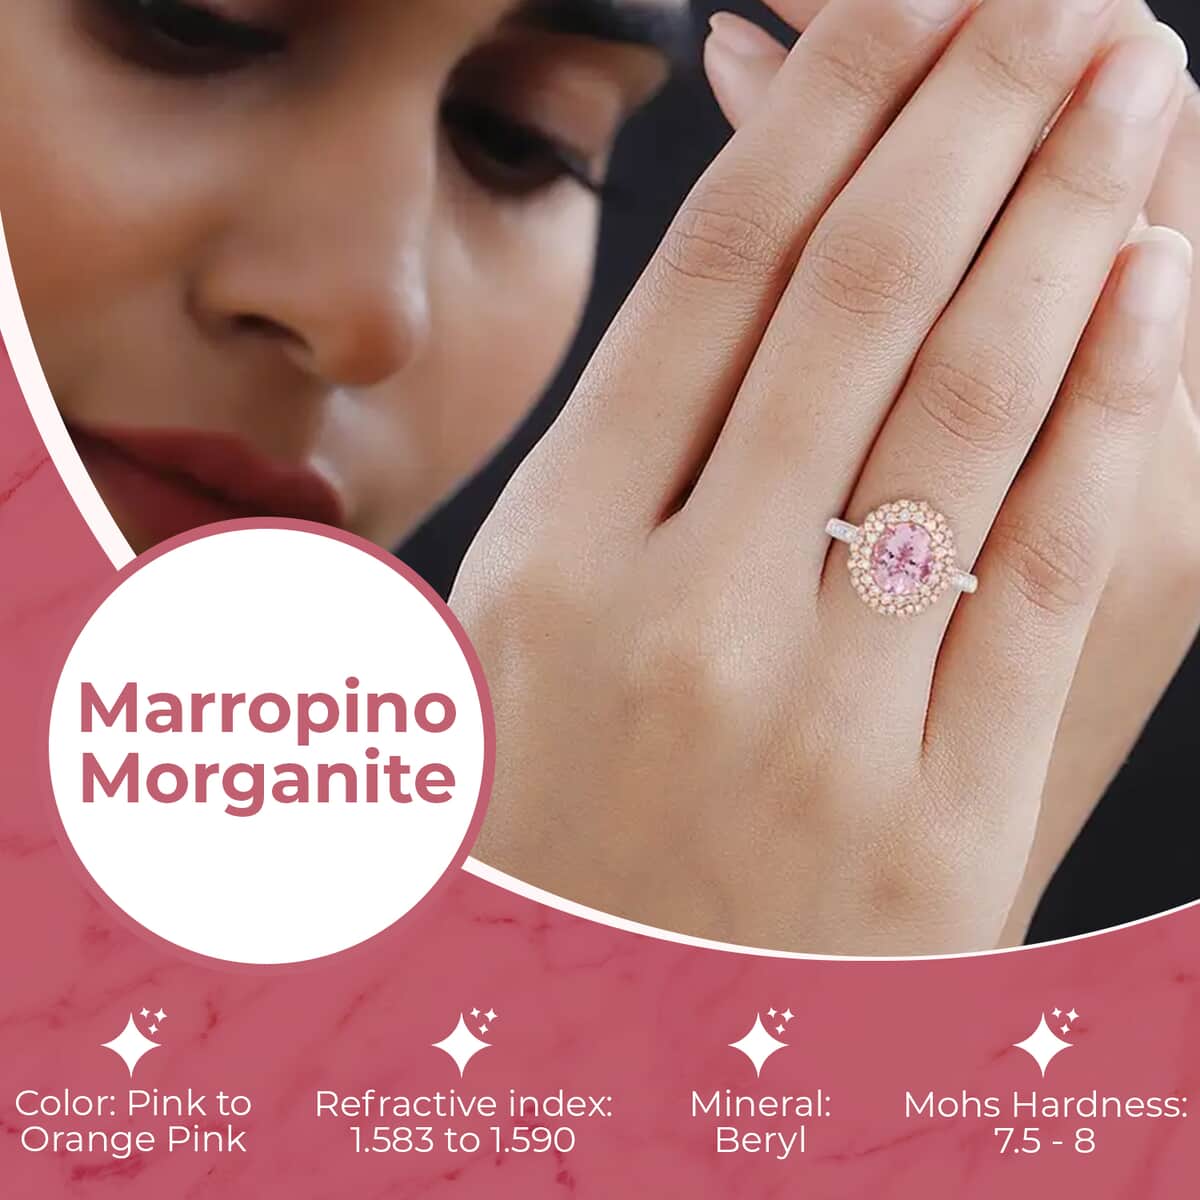 Ankur Treasure Chest Modani Marropino Morganite Ring, 14K Rose Gold Ring, Diamond Floral Halo Ring, Natural Pink And White Diamond Accent Ring, Promise Rings 1.95 ctw (Size 5.0) image number 2